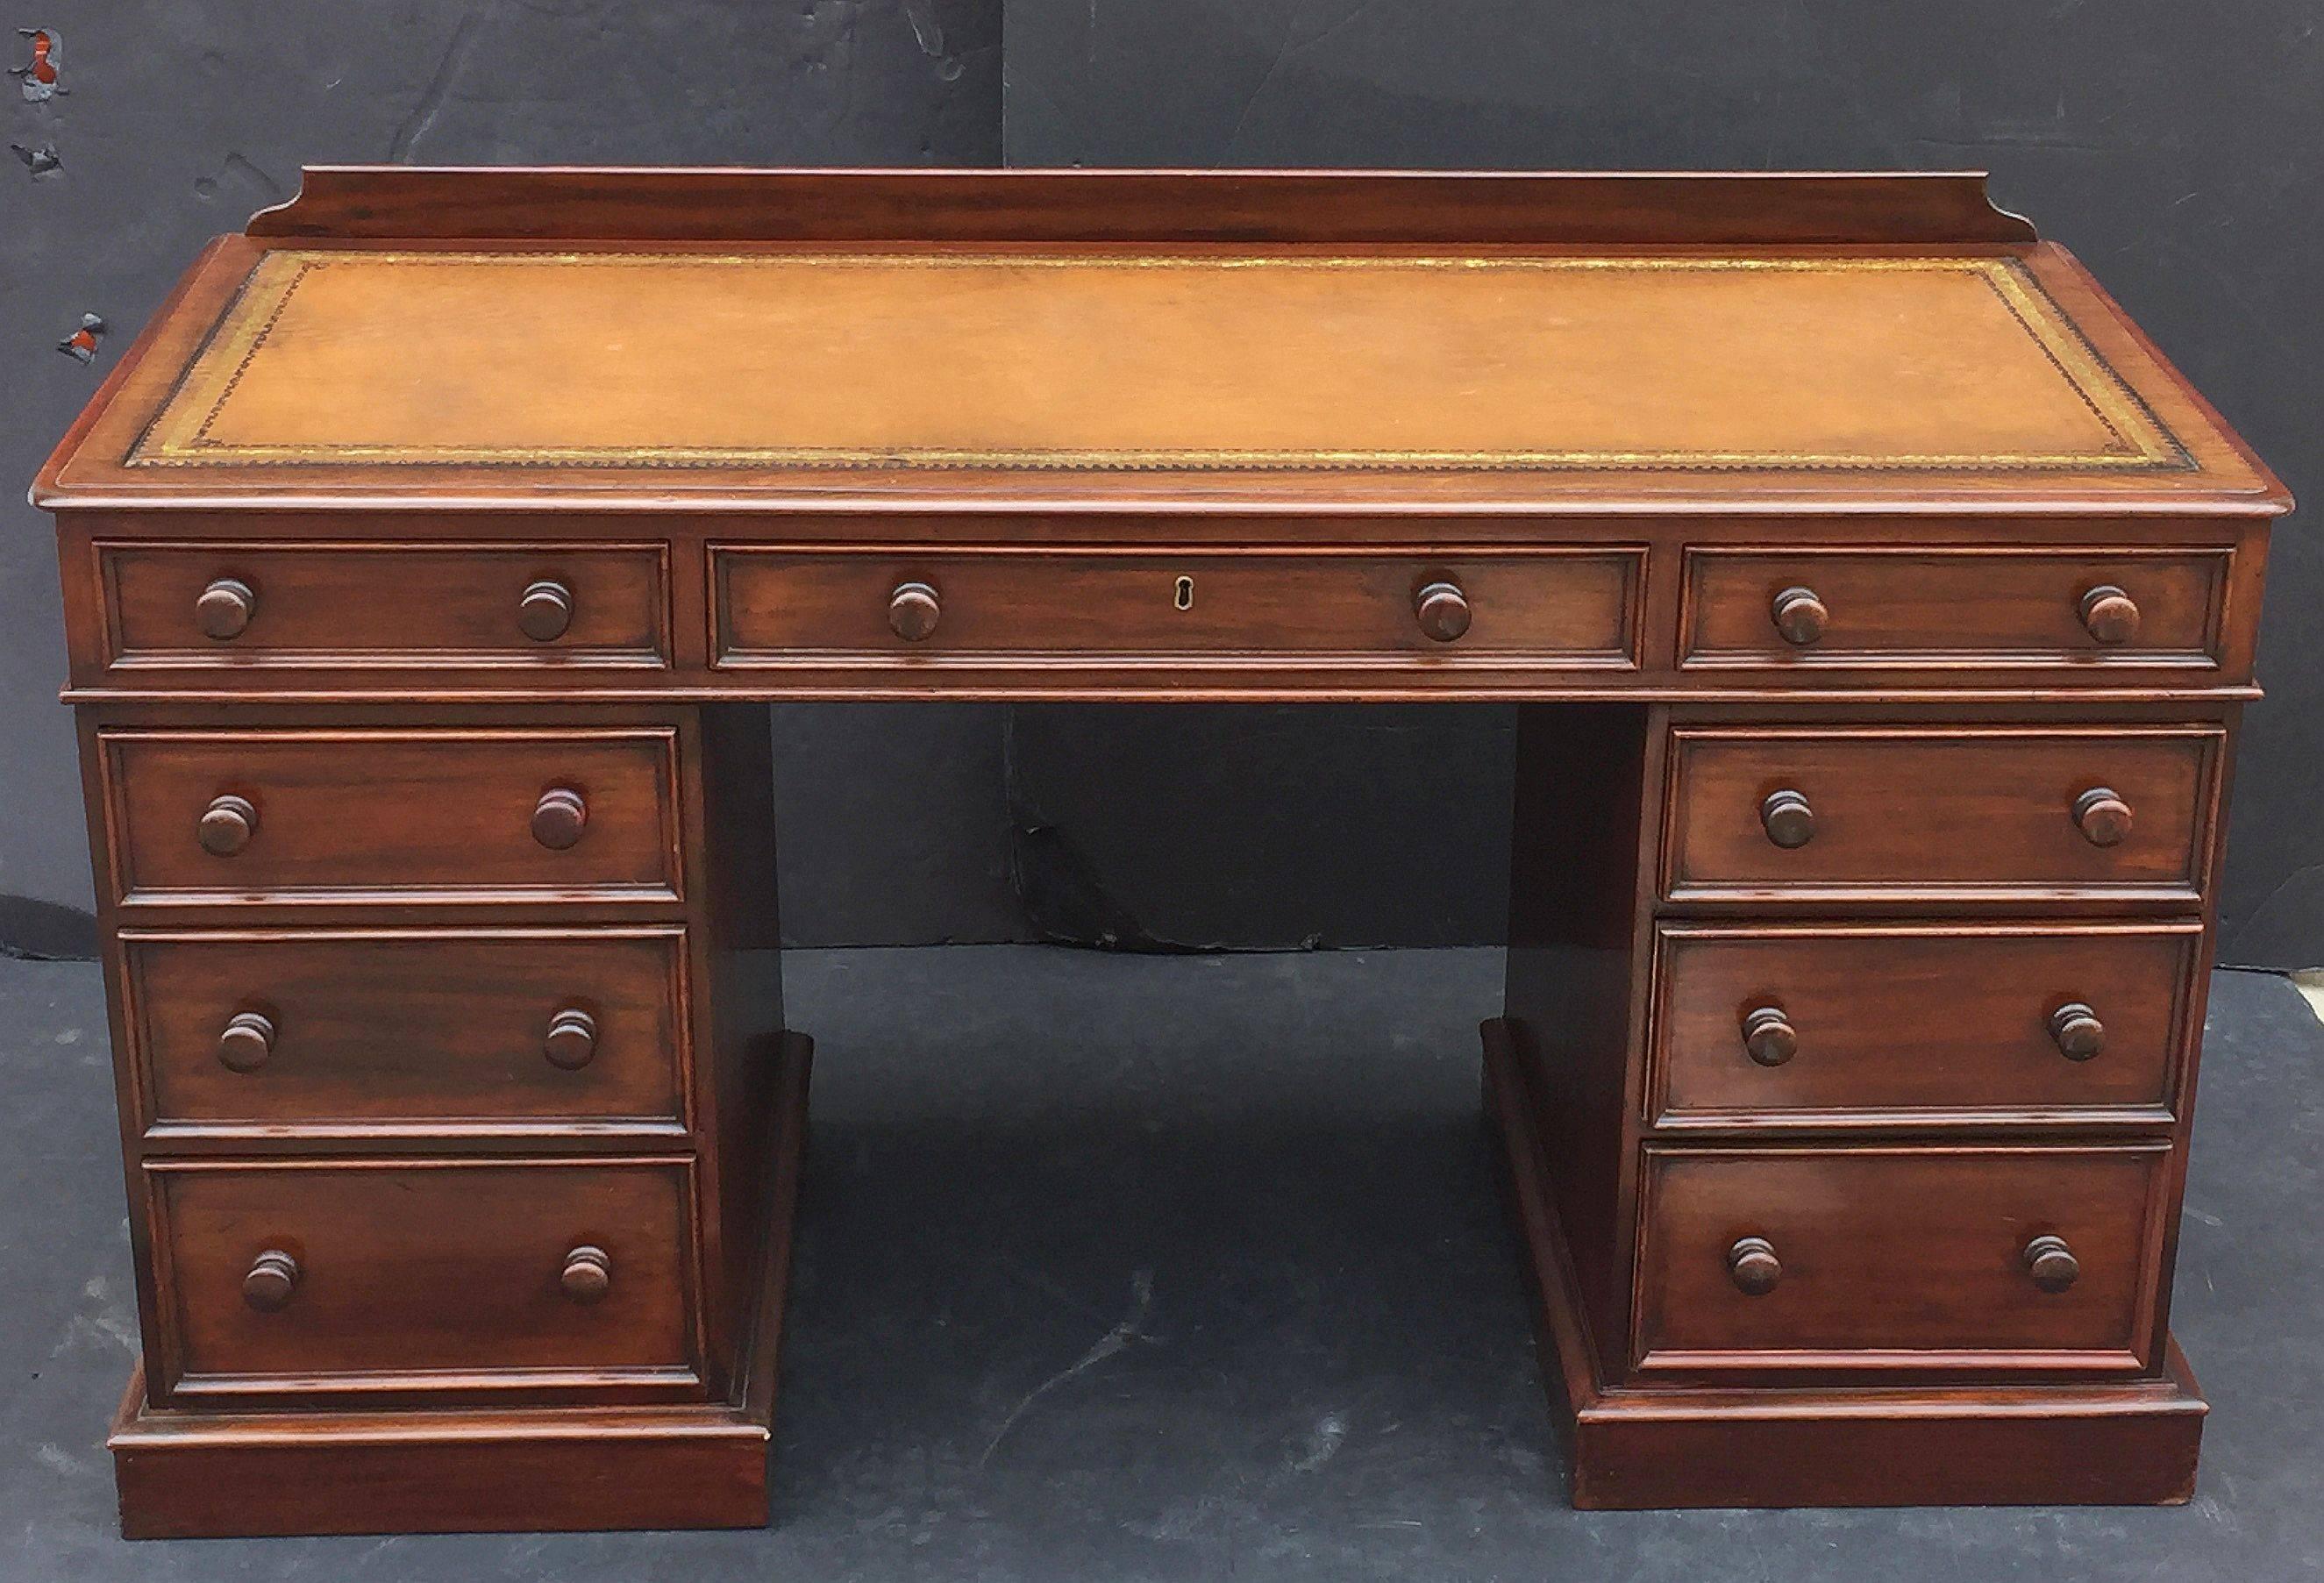 A fine English pedestal desk or writing table of mahogany, featuring an embossed leather top with backsplash gallery, with a frieze of two opposing beaded small drawers surrounding a beaded center long drawer with brass escutcheon and key. Set upon